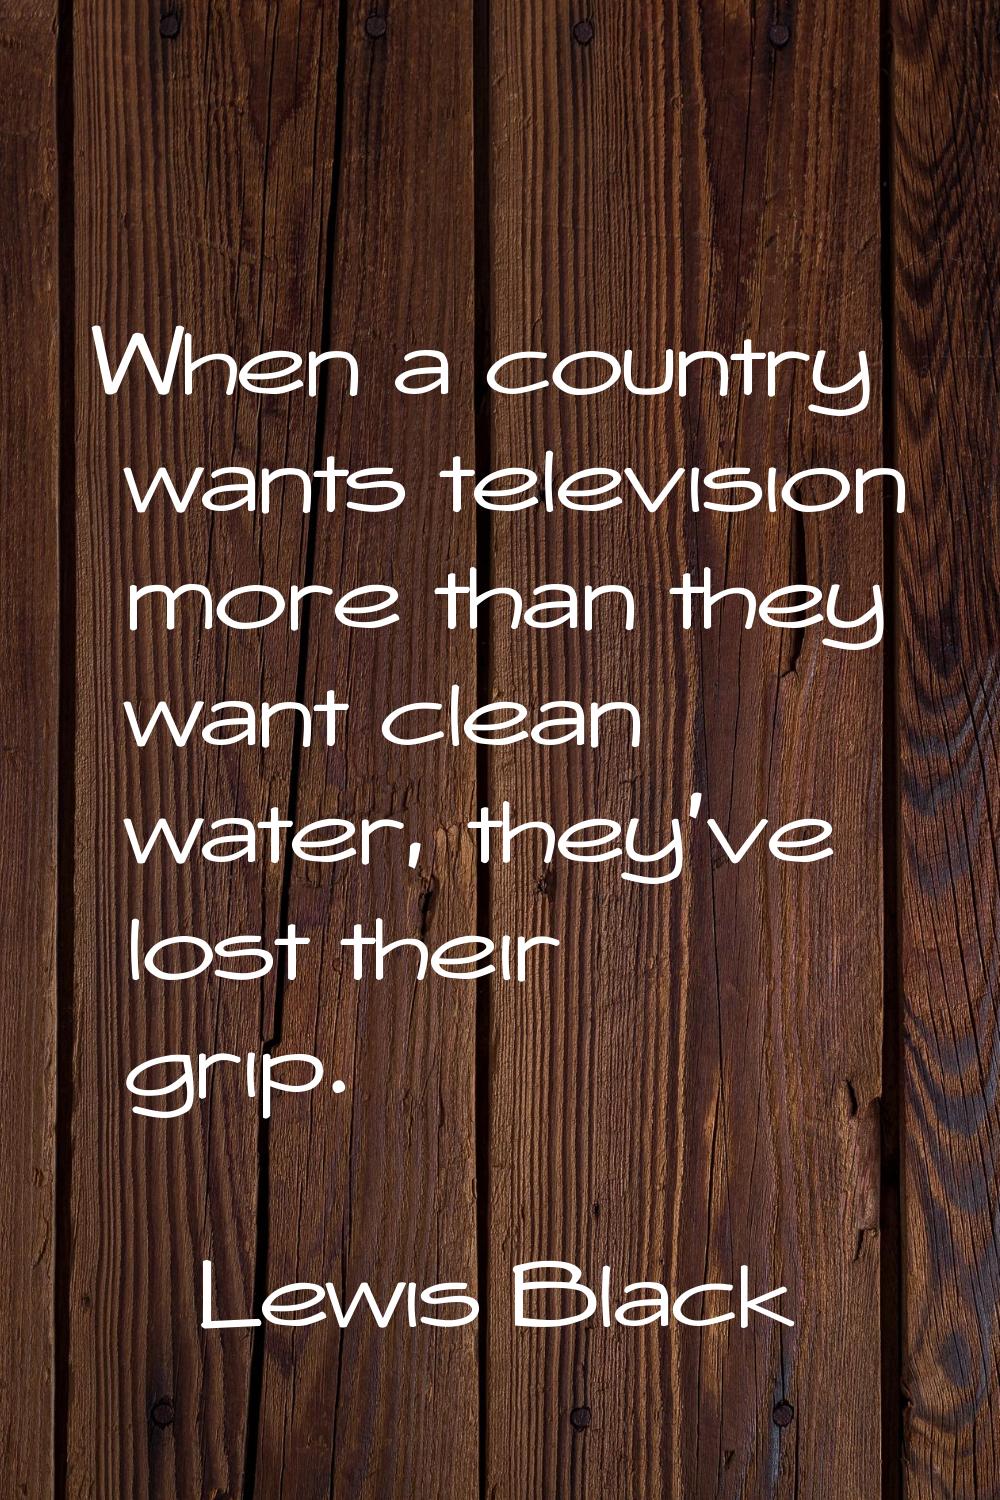 When a country wants television more than they want clean water, they've lost their grip.